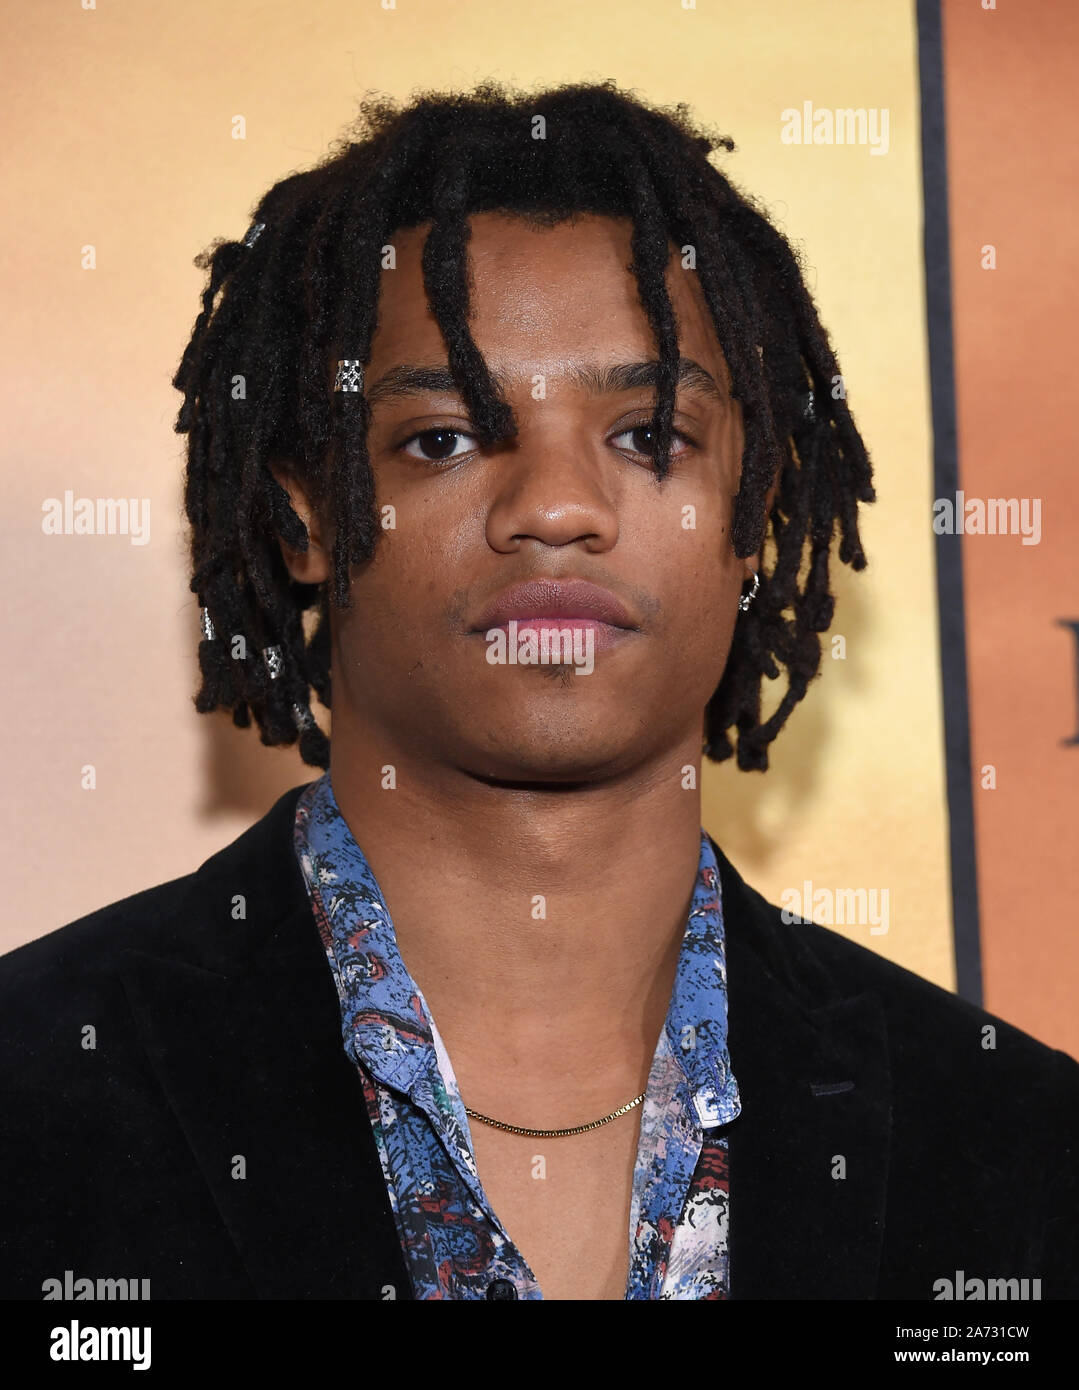 October 29, 2019, Los Angeles, California, USA: Henry Hunter Hall arrives for the premiere of the film â€˜Harriet at the Orpheum theater. (Credit Image: © Lisa O'Connor/ZUMA Wire) Stock Photo